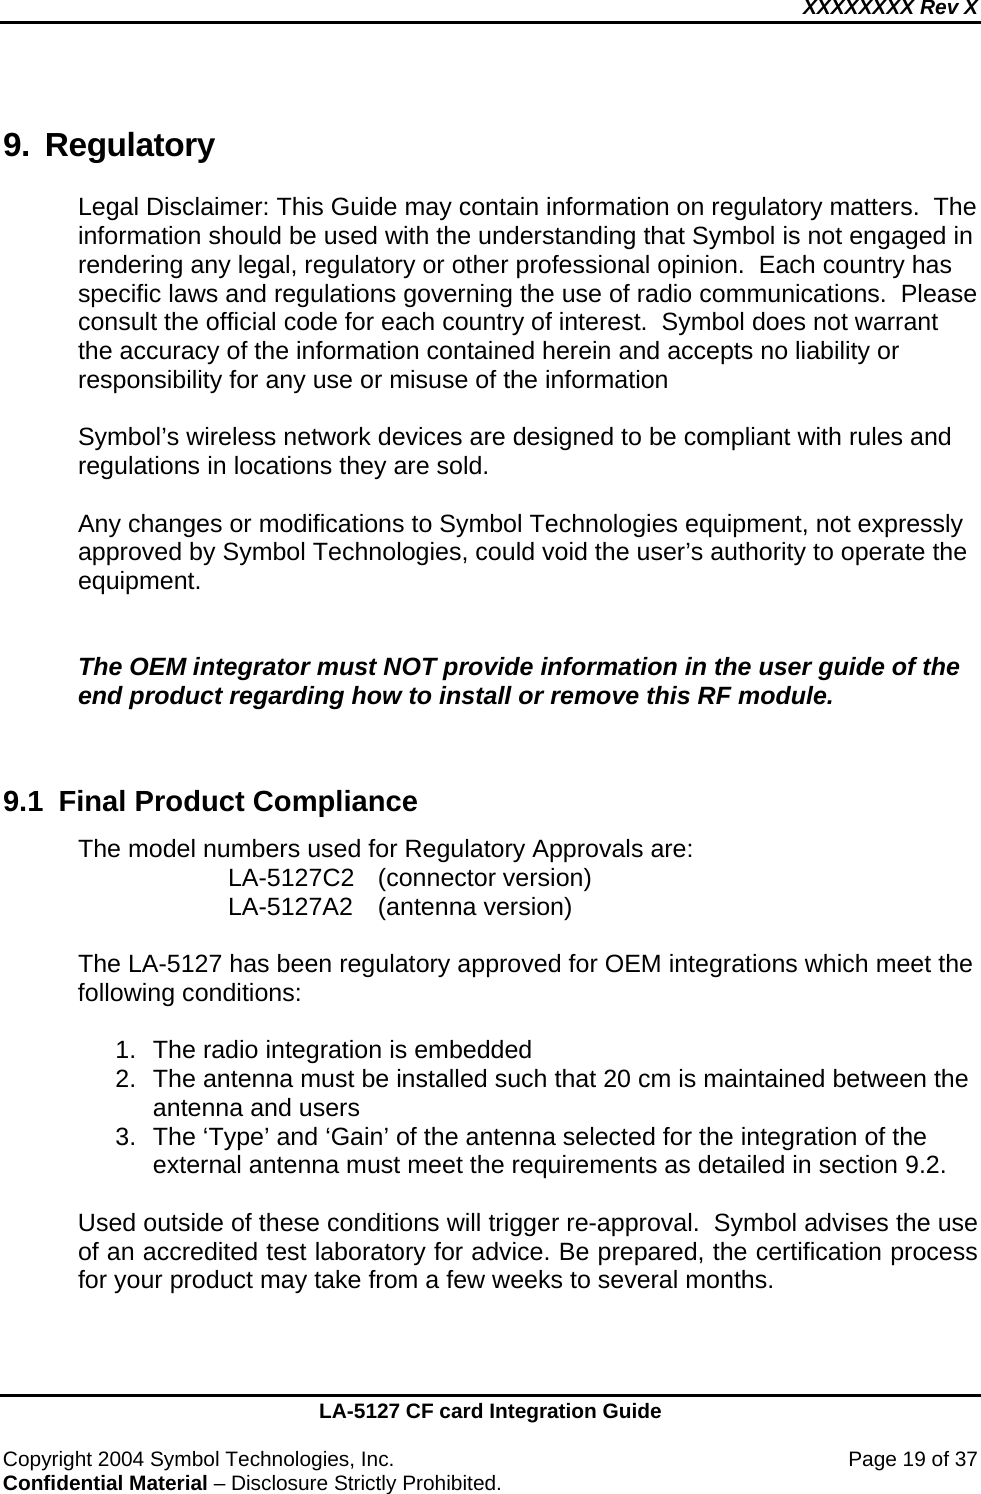 XXXXXXXX Rev X    LA-5127 CF card Integration Guide  Copyright 2004 Symbol Technologies, Inc.    Page 19 of 37 Confidential Material – Disclosure Strictly Prohibited. 9. Regulatory Legal Disclaimer: This Guide may contain information on regulatory matters.  The information should be used with the understanding that Symbol is not engaged in rendering any legal, regulatory or other professional opinion.  Each country has specific laws and regulations governing the use of radio communications.  Please consult the official code for each country of interest.  Symbol does not warrant the accuracy of the information contained herein and accepts no liability or responsibility for any use or misuse of the information  Symbol’s wireless network devices are designed to be compliant with rules and regulations in locations they are sold.   Any changes or modifications to Symbol Technologies equipment, not expressly approved by Symbol Technologies, could void the user’s authority to operate the equipment.   The OEM integrator must NOT provide information in the user guide of the end product regarding how to install or remove this RF module.   9.1  Final Product Compliance The model numbers used for Regulatory Approvals are: LA-5127C2 (connector version)  LA-5127A2 (antenna version)  The LA-5127 has been regulatory approved for OEM integrations which meet the following conditions:  1.  The radio integration is embedded 2.  The antenna must be installed such that 20 cm is maintained between the antenna and users 3.  The ‘Type’ and ‘Gain’ of the antenna selected for the integration of the external antenna must meet the requirements as detailed in section 9.2.  Used outside of these conditions will trigger re-approval.  Symbol advises the use of an accredited test laboratory for advice. Be prepared, the certification process for your product may take from a few weeks to several months.   